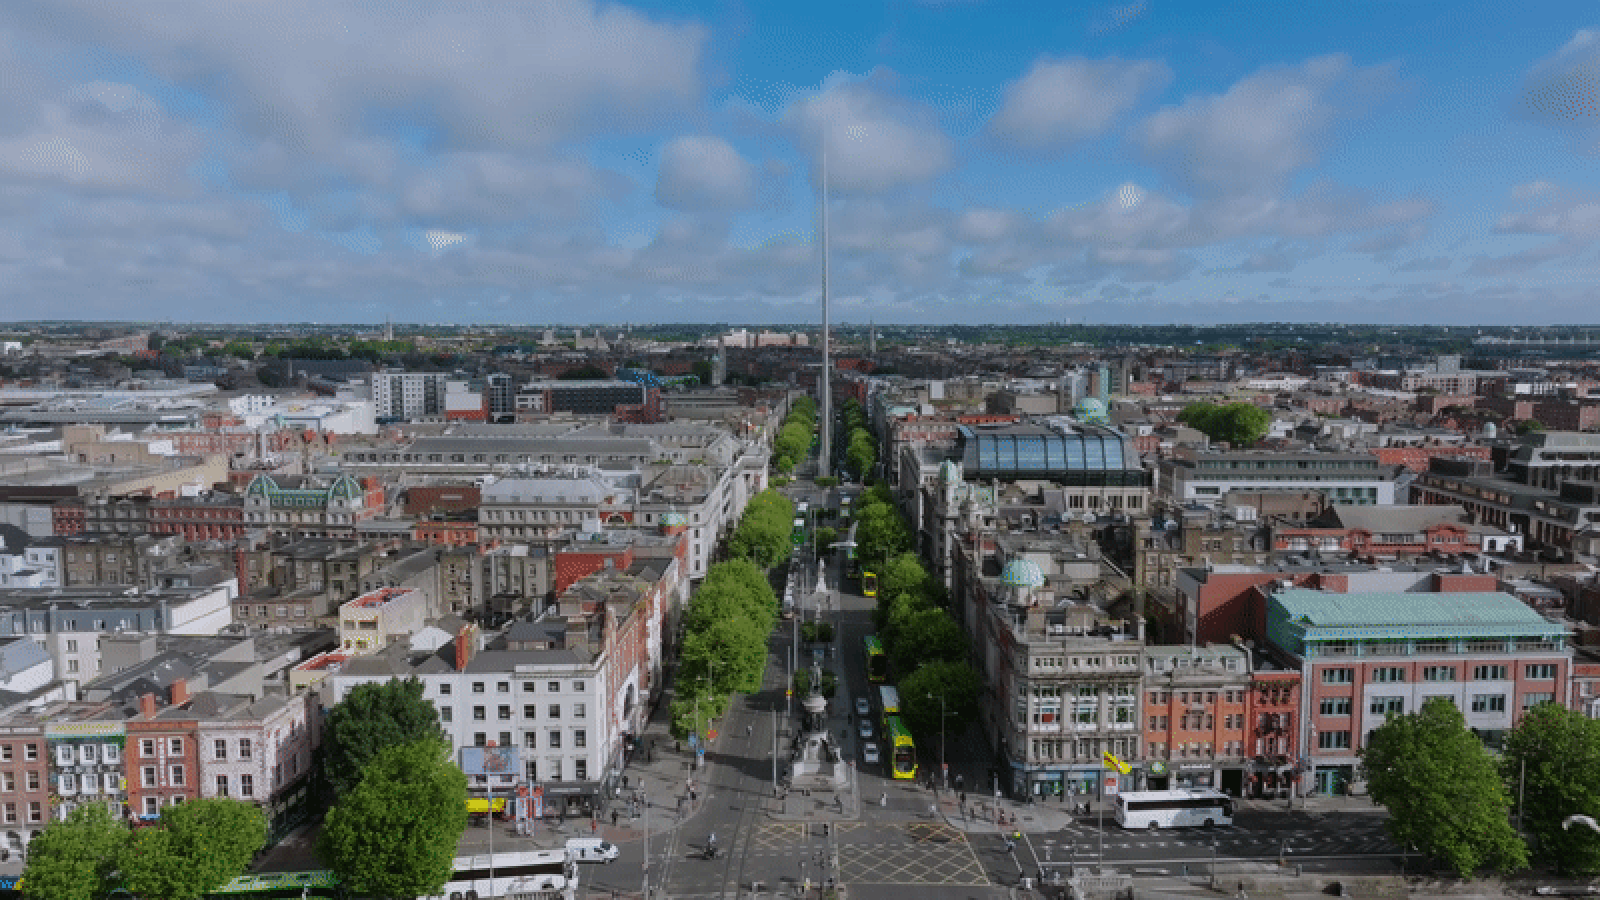 Drone footage of O'Connell Street, Dublin